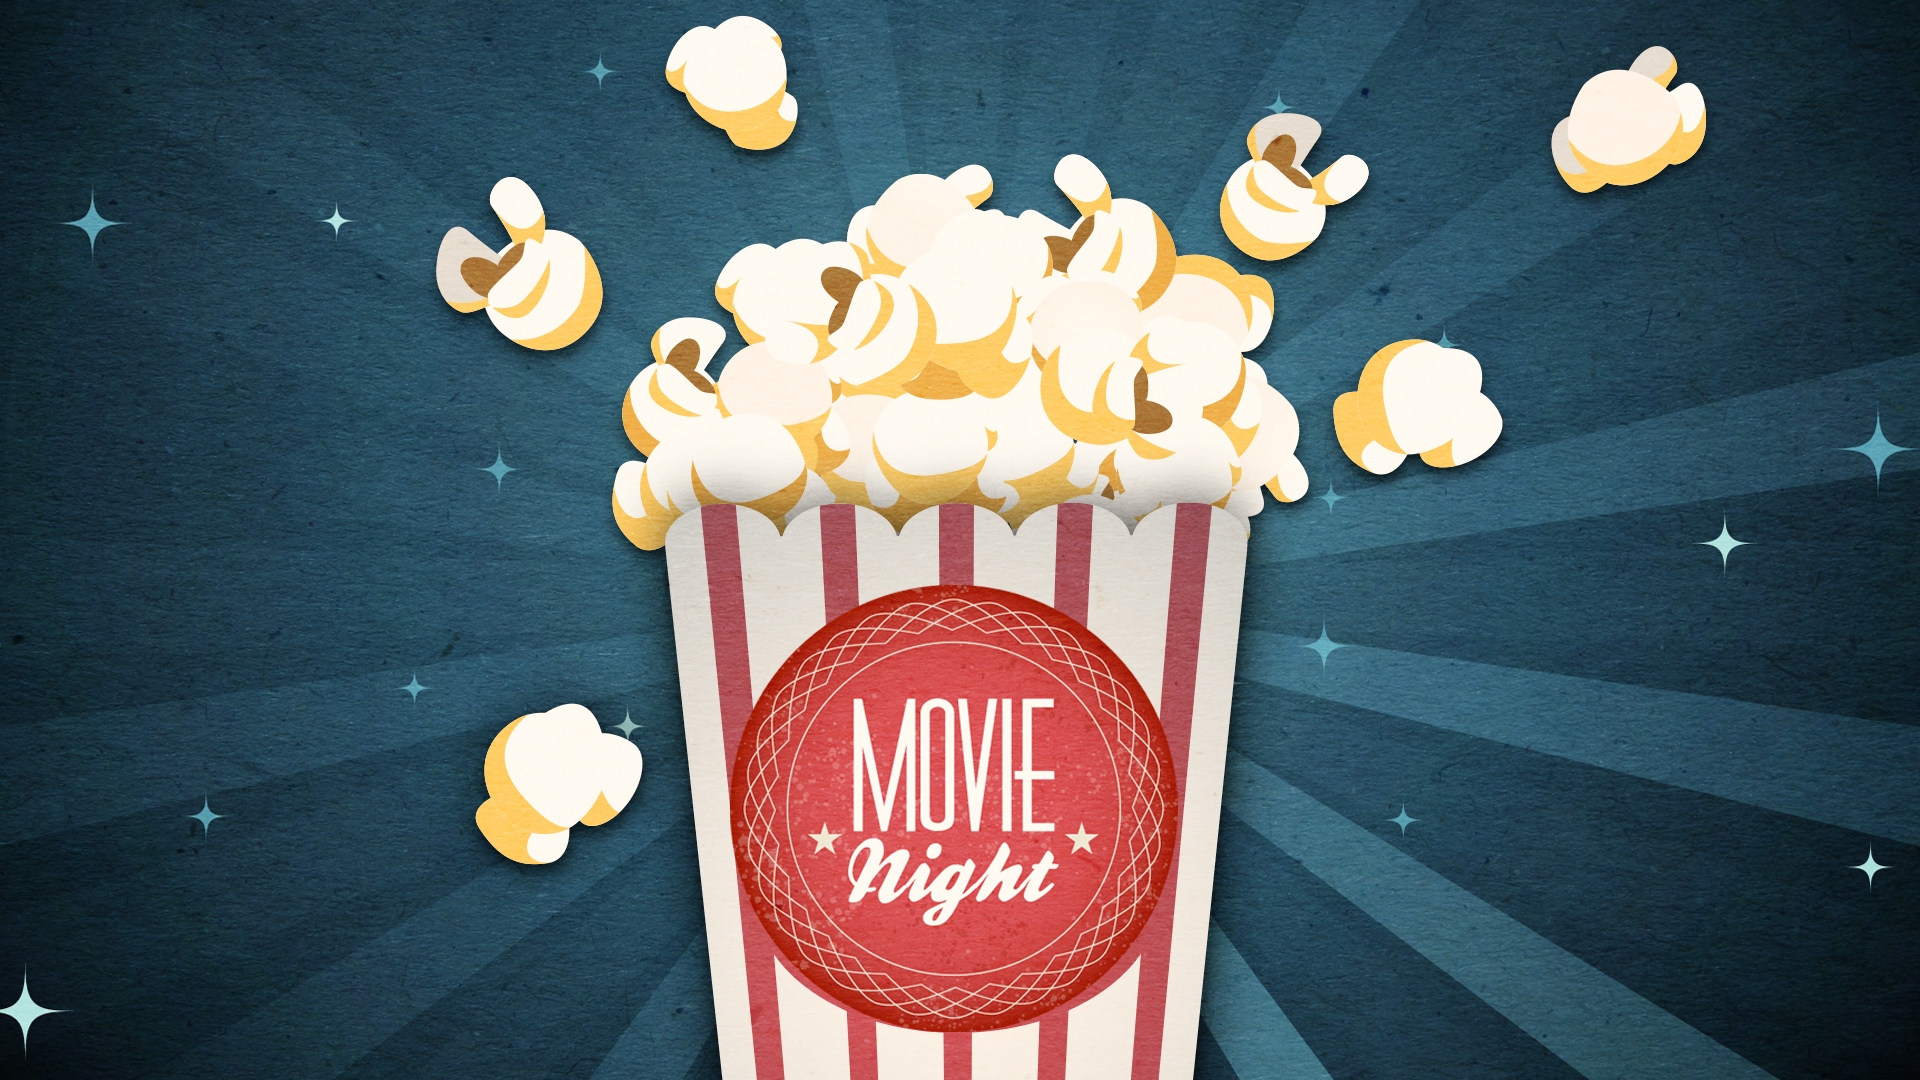 How to Make Movie Night More Exciting - The Action Elite